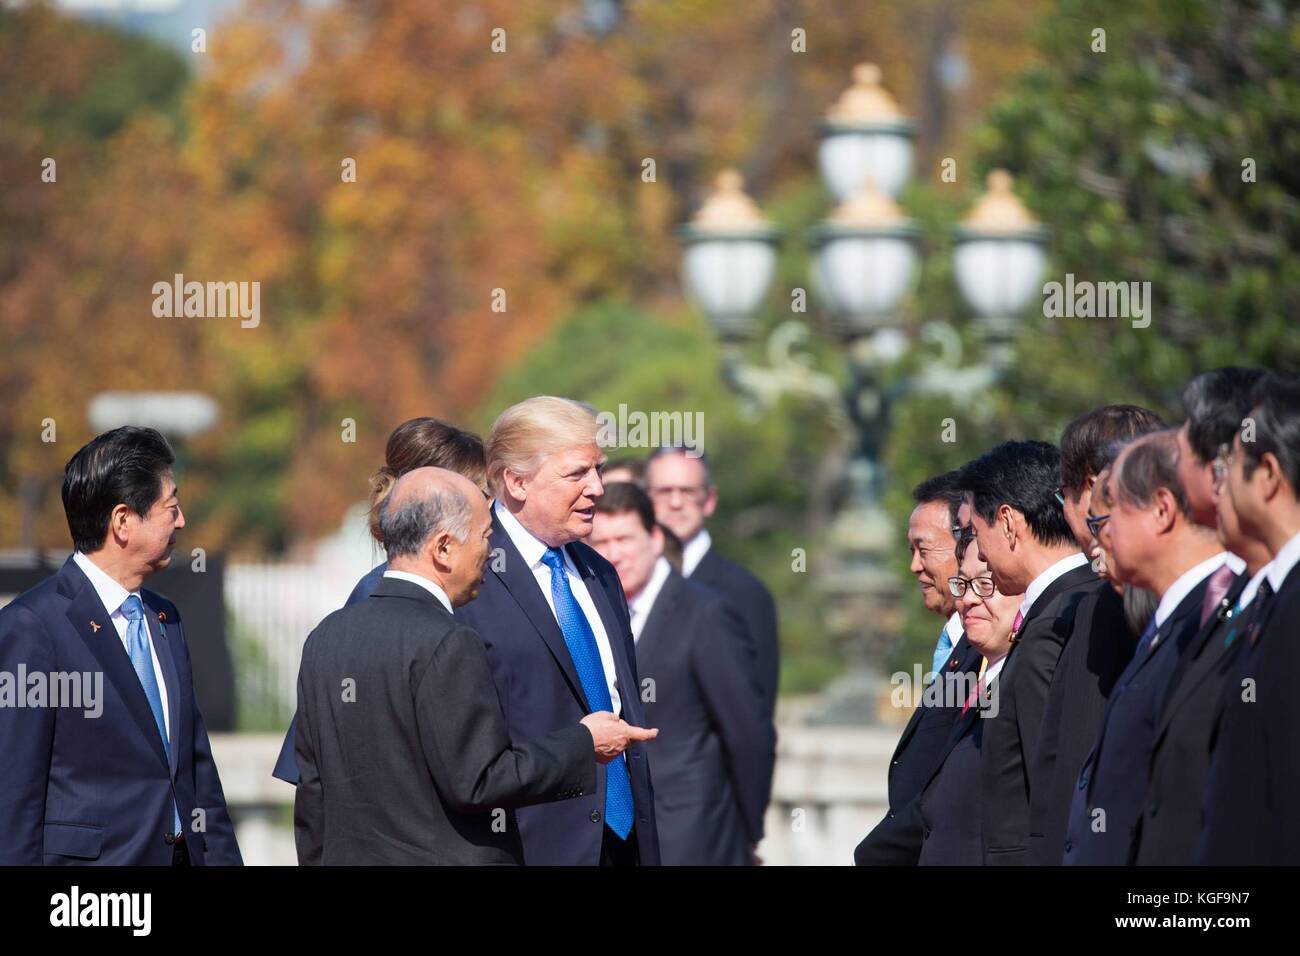 U.S President Donald Trump is introduced to Japanese officials as Japanese Prime Minister Shinzo Abe, left, looks on at the Akasaka Palace November 6, 2017 in Tokyo, Japan. Trump is on a three-day visit to Japan, the first stop of a 13-day swing through Asia. Stock Photo